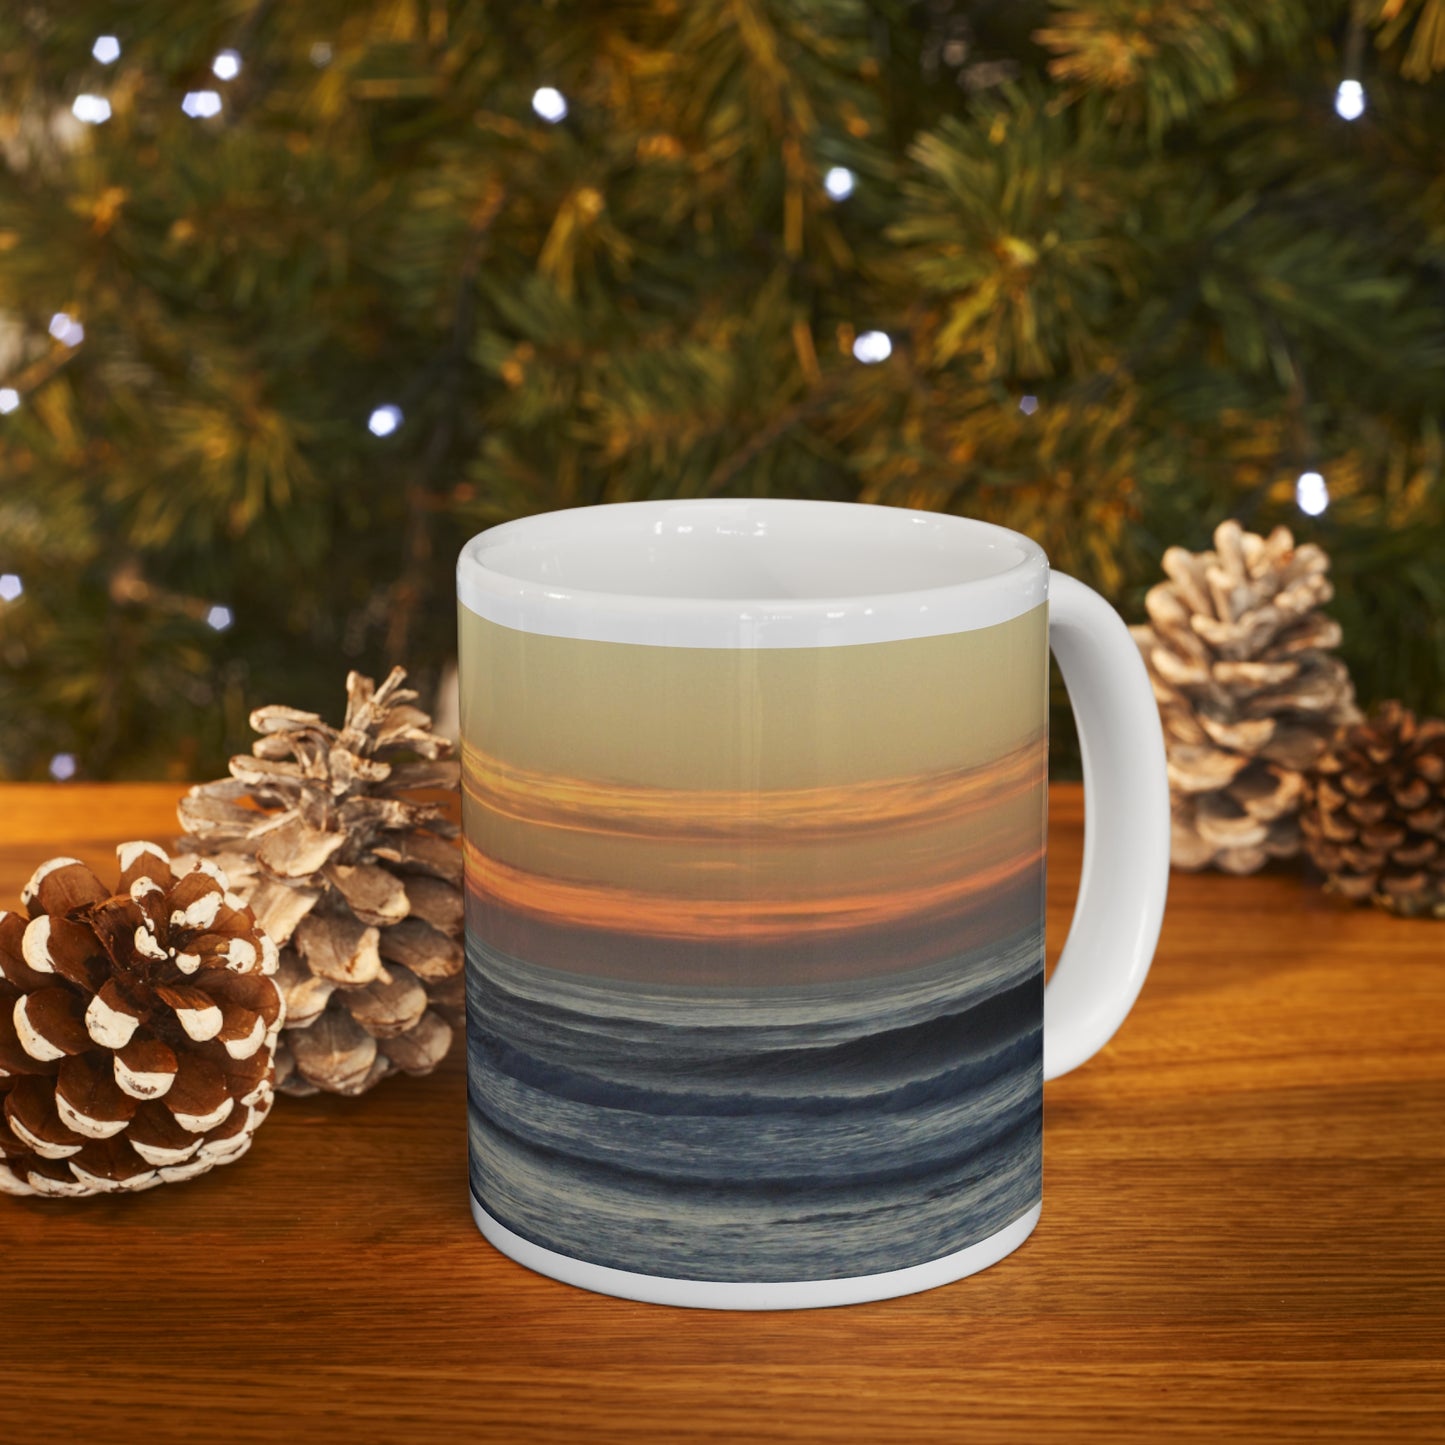 Mock up of the mug on a wooden surface